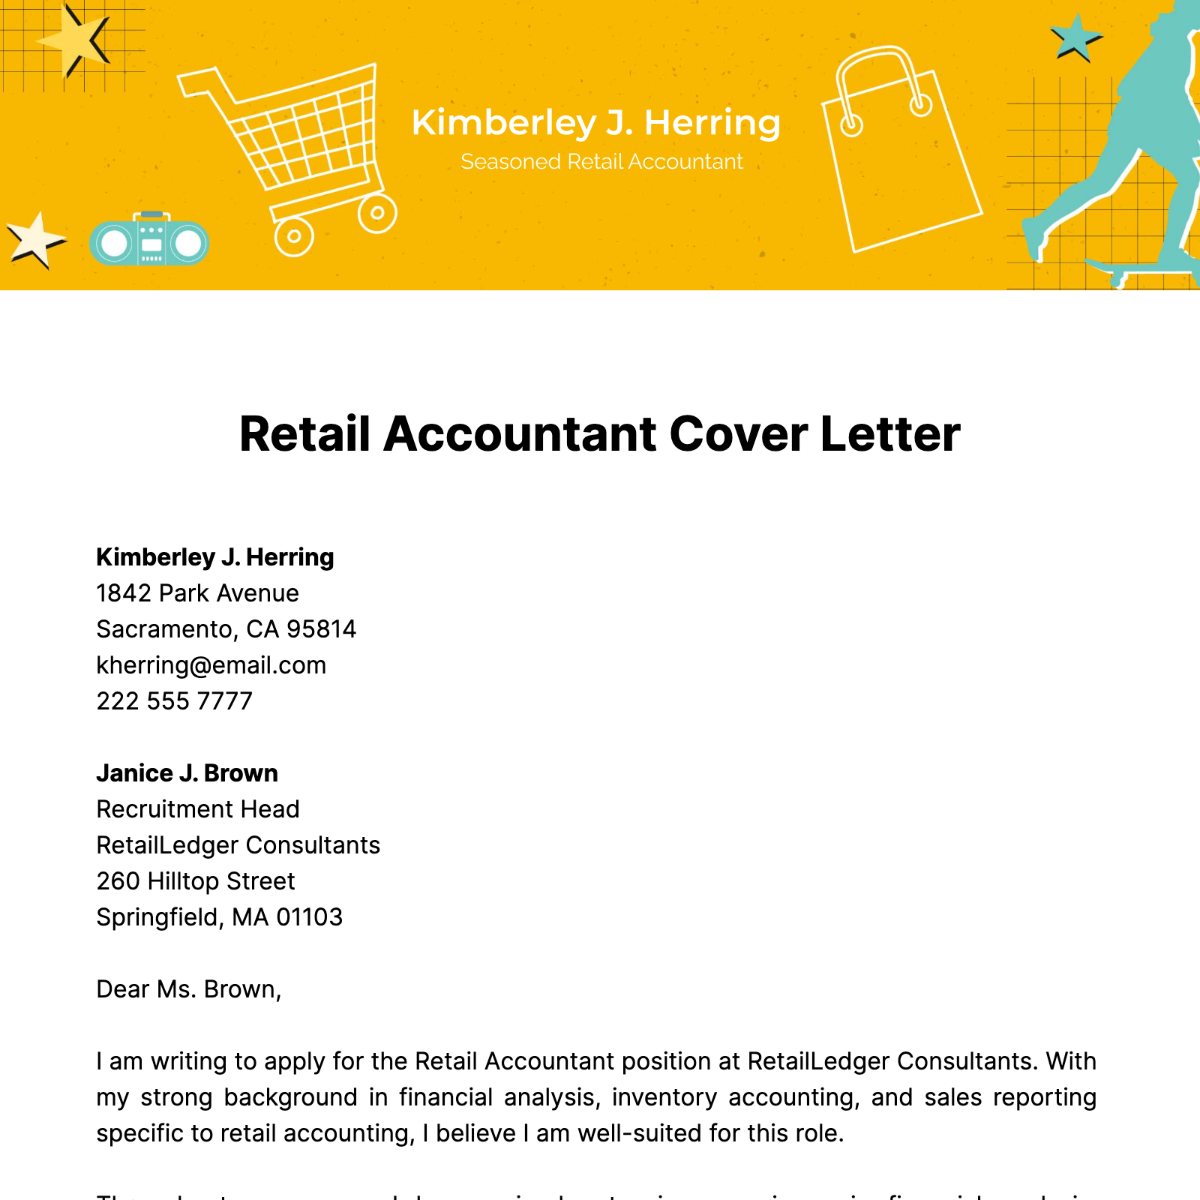 Retail Accountant Cover Letter Template